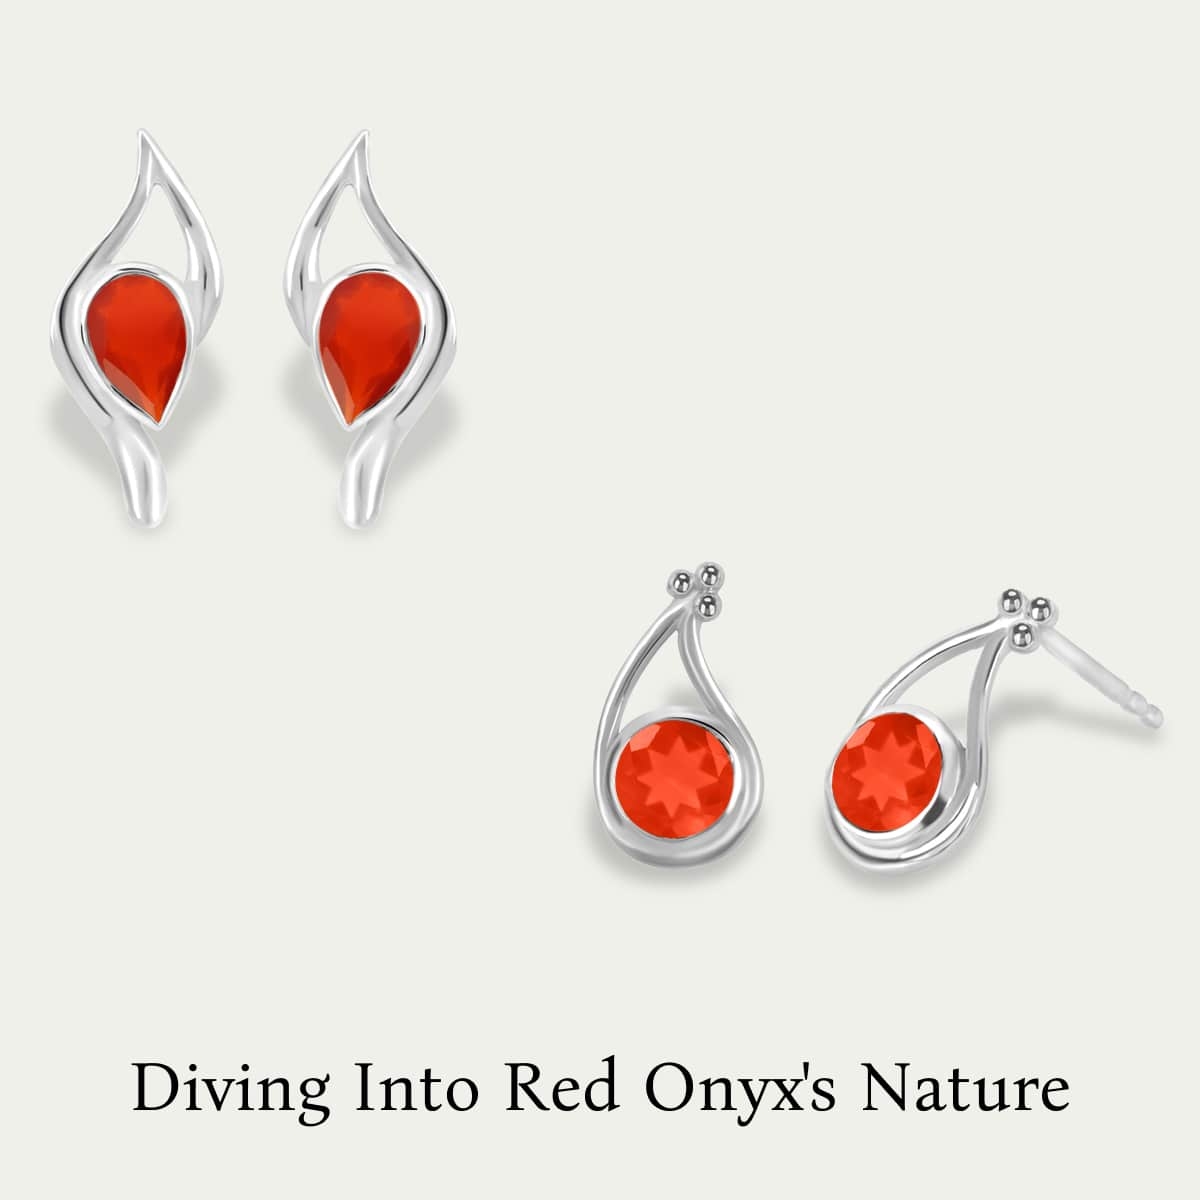 Physical Properties of Red Onyx Gemstone